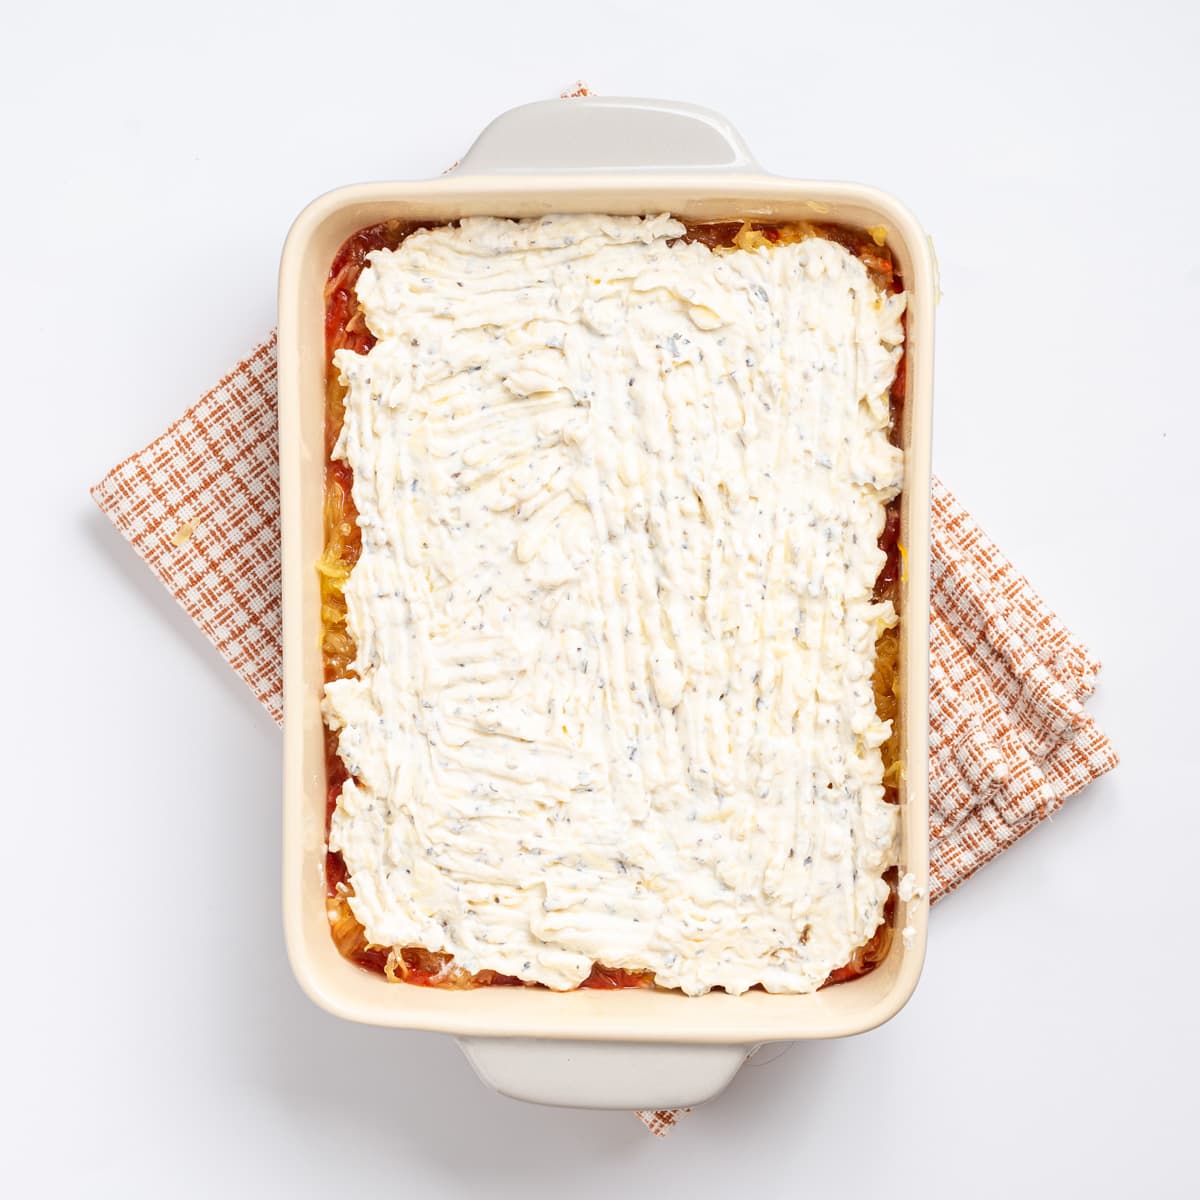 An overhead image of a layer of the ricotta cheese mixture spread on top of the layer of spaghetti squash.